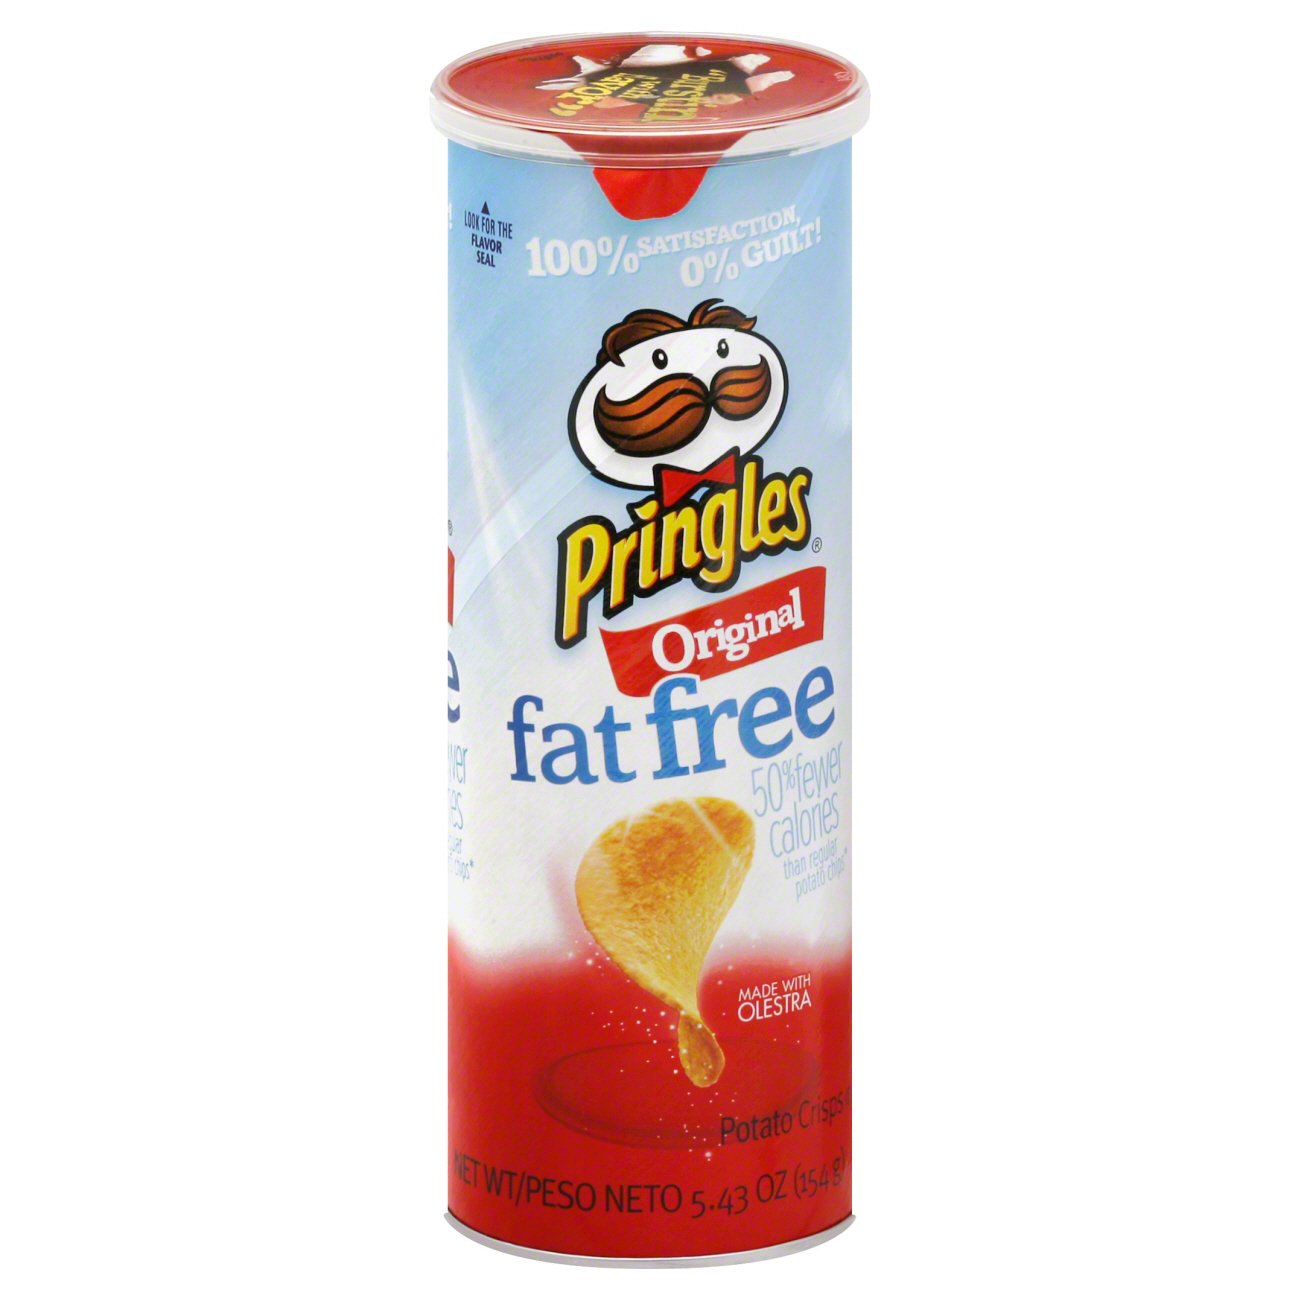 What Are Pringles Made Of?